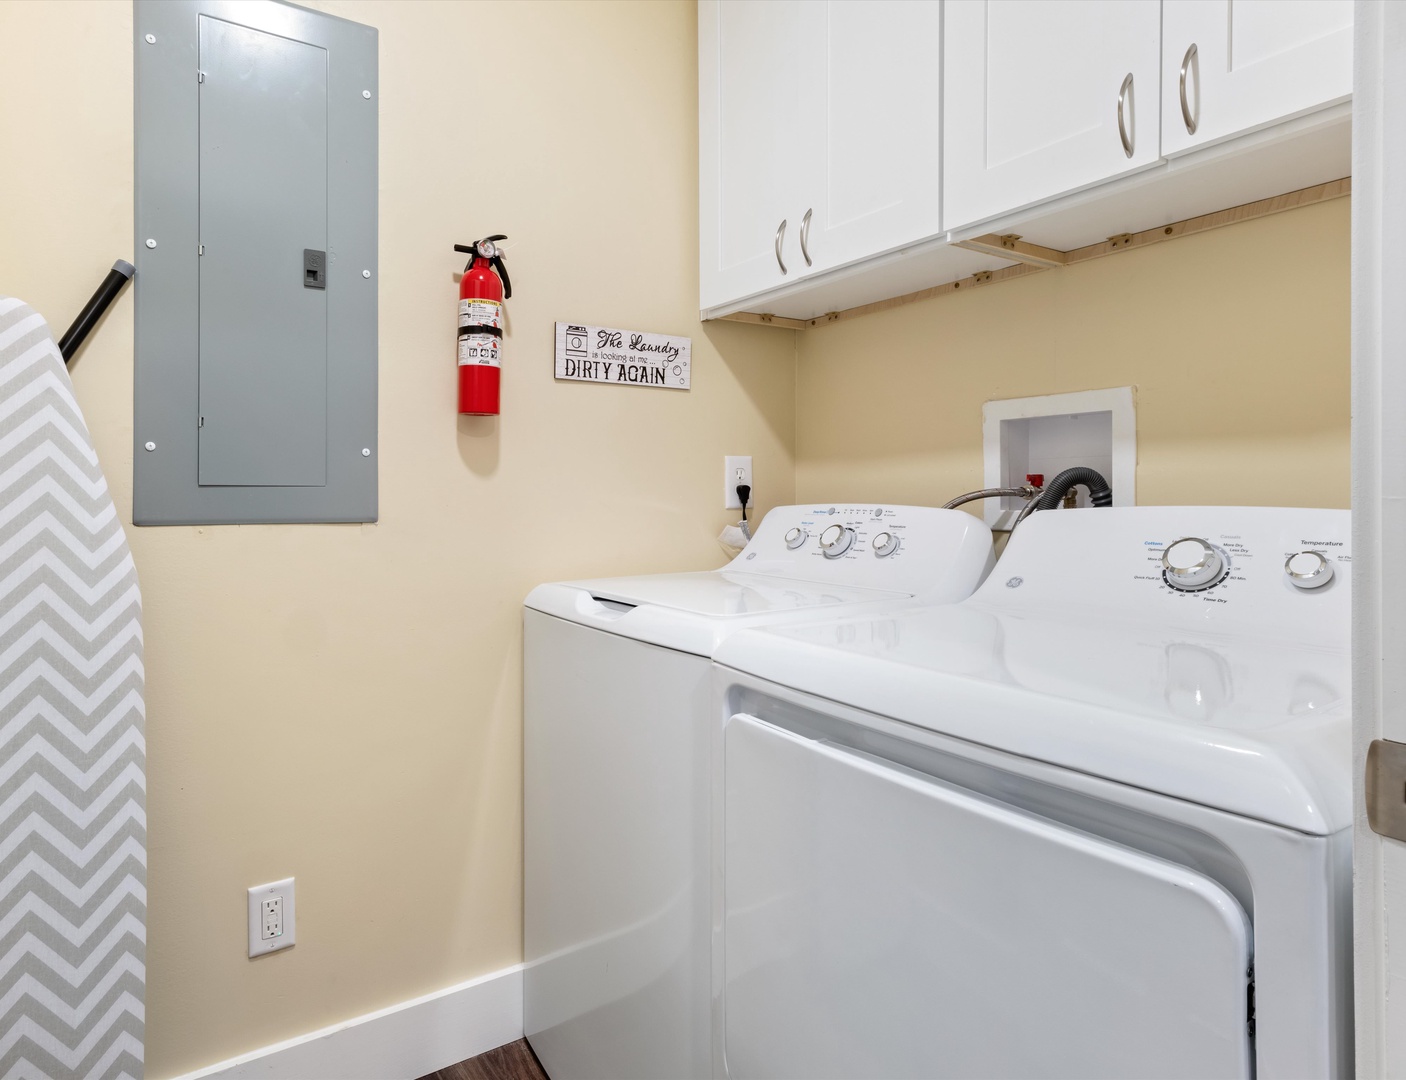 Second laundry room at the back of house